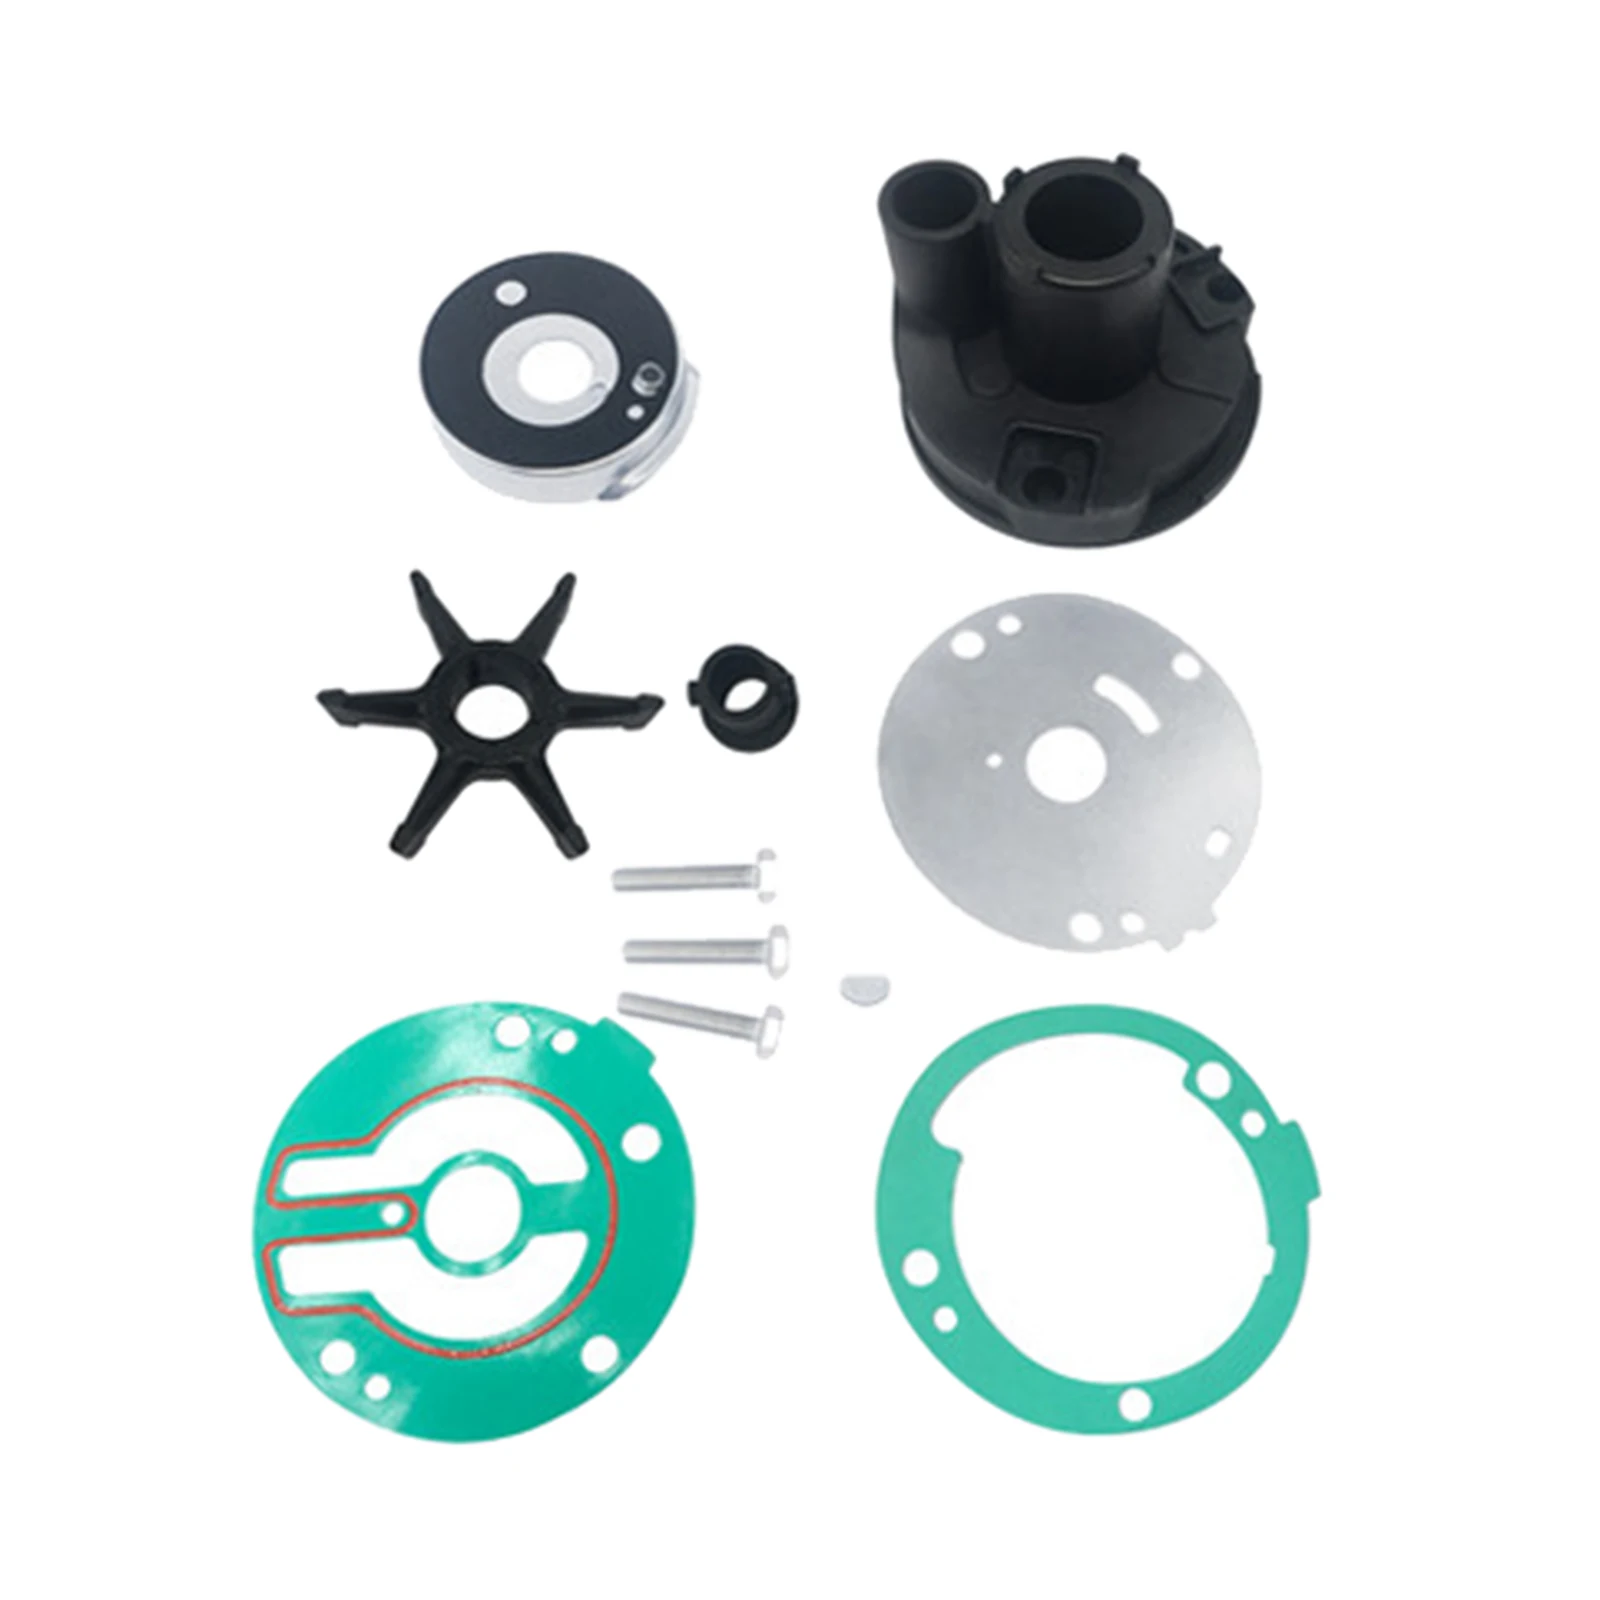 Water Pump Impeller Kit for Yamaha 25HP 30HP 689-W0078-05 Outboard Engines